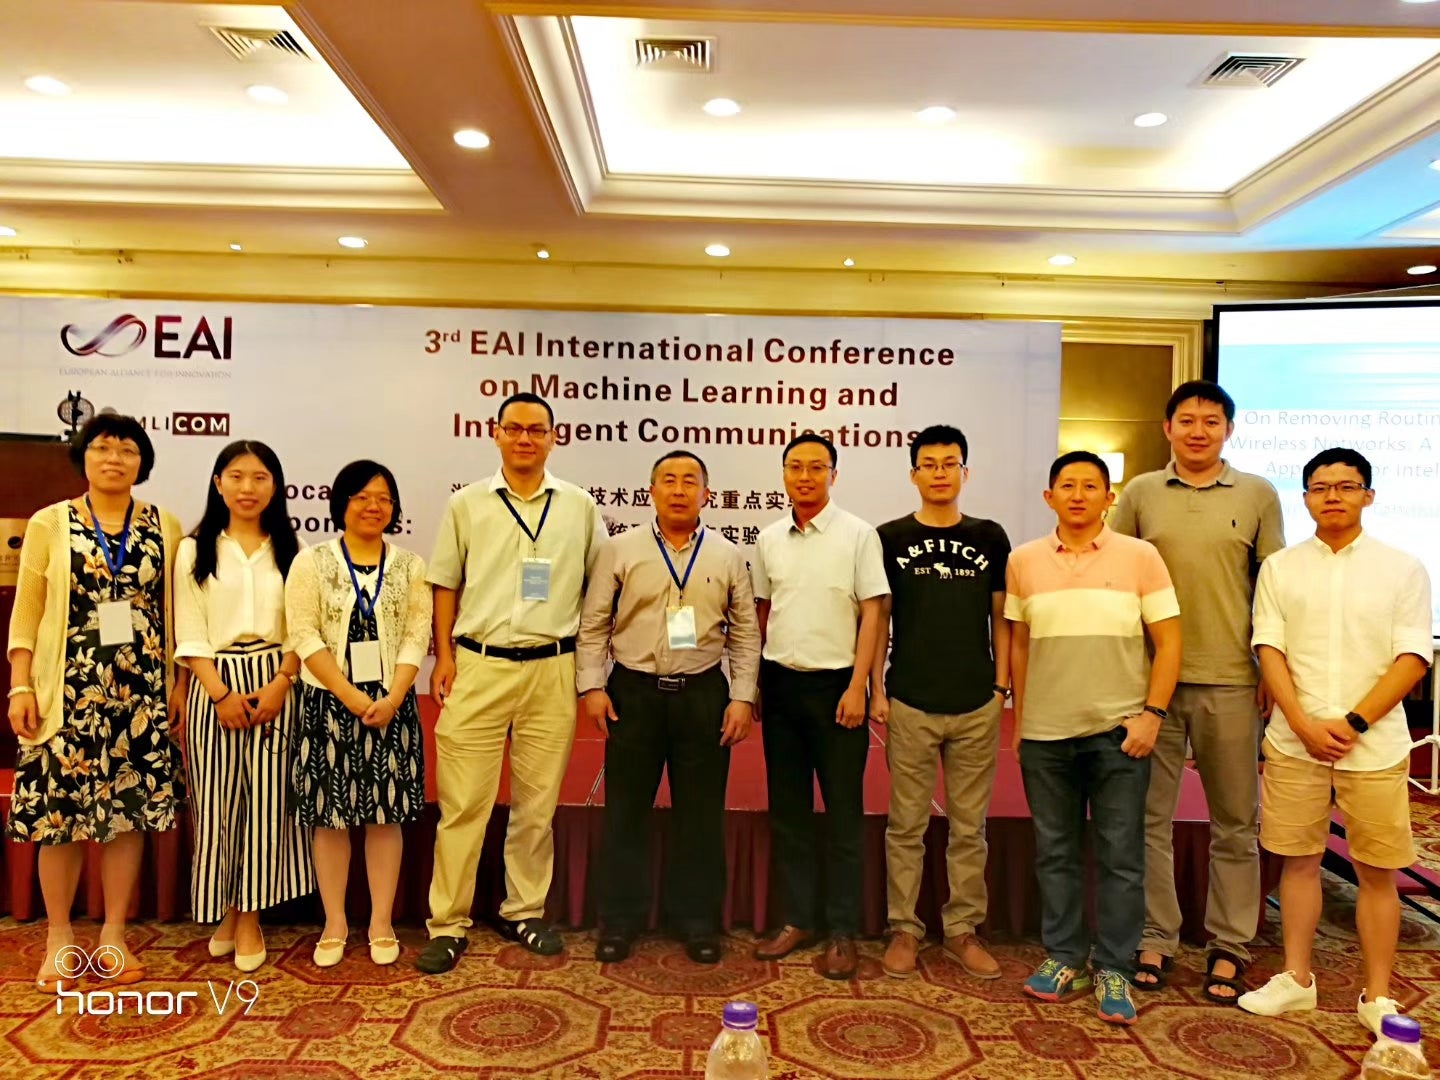 Prof. Shen and many BBCR members attended the 3rd EAI International Conference on MLICOM 2018